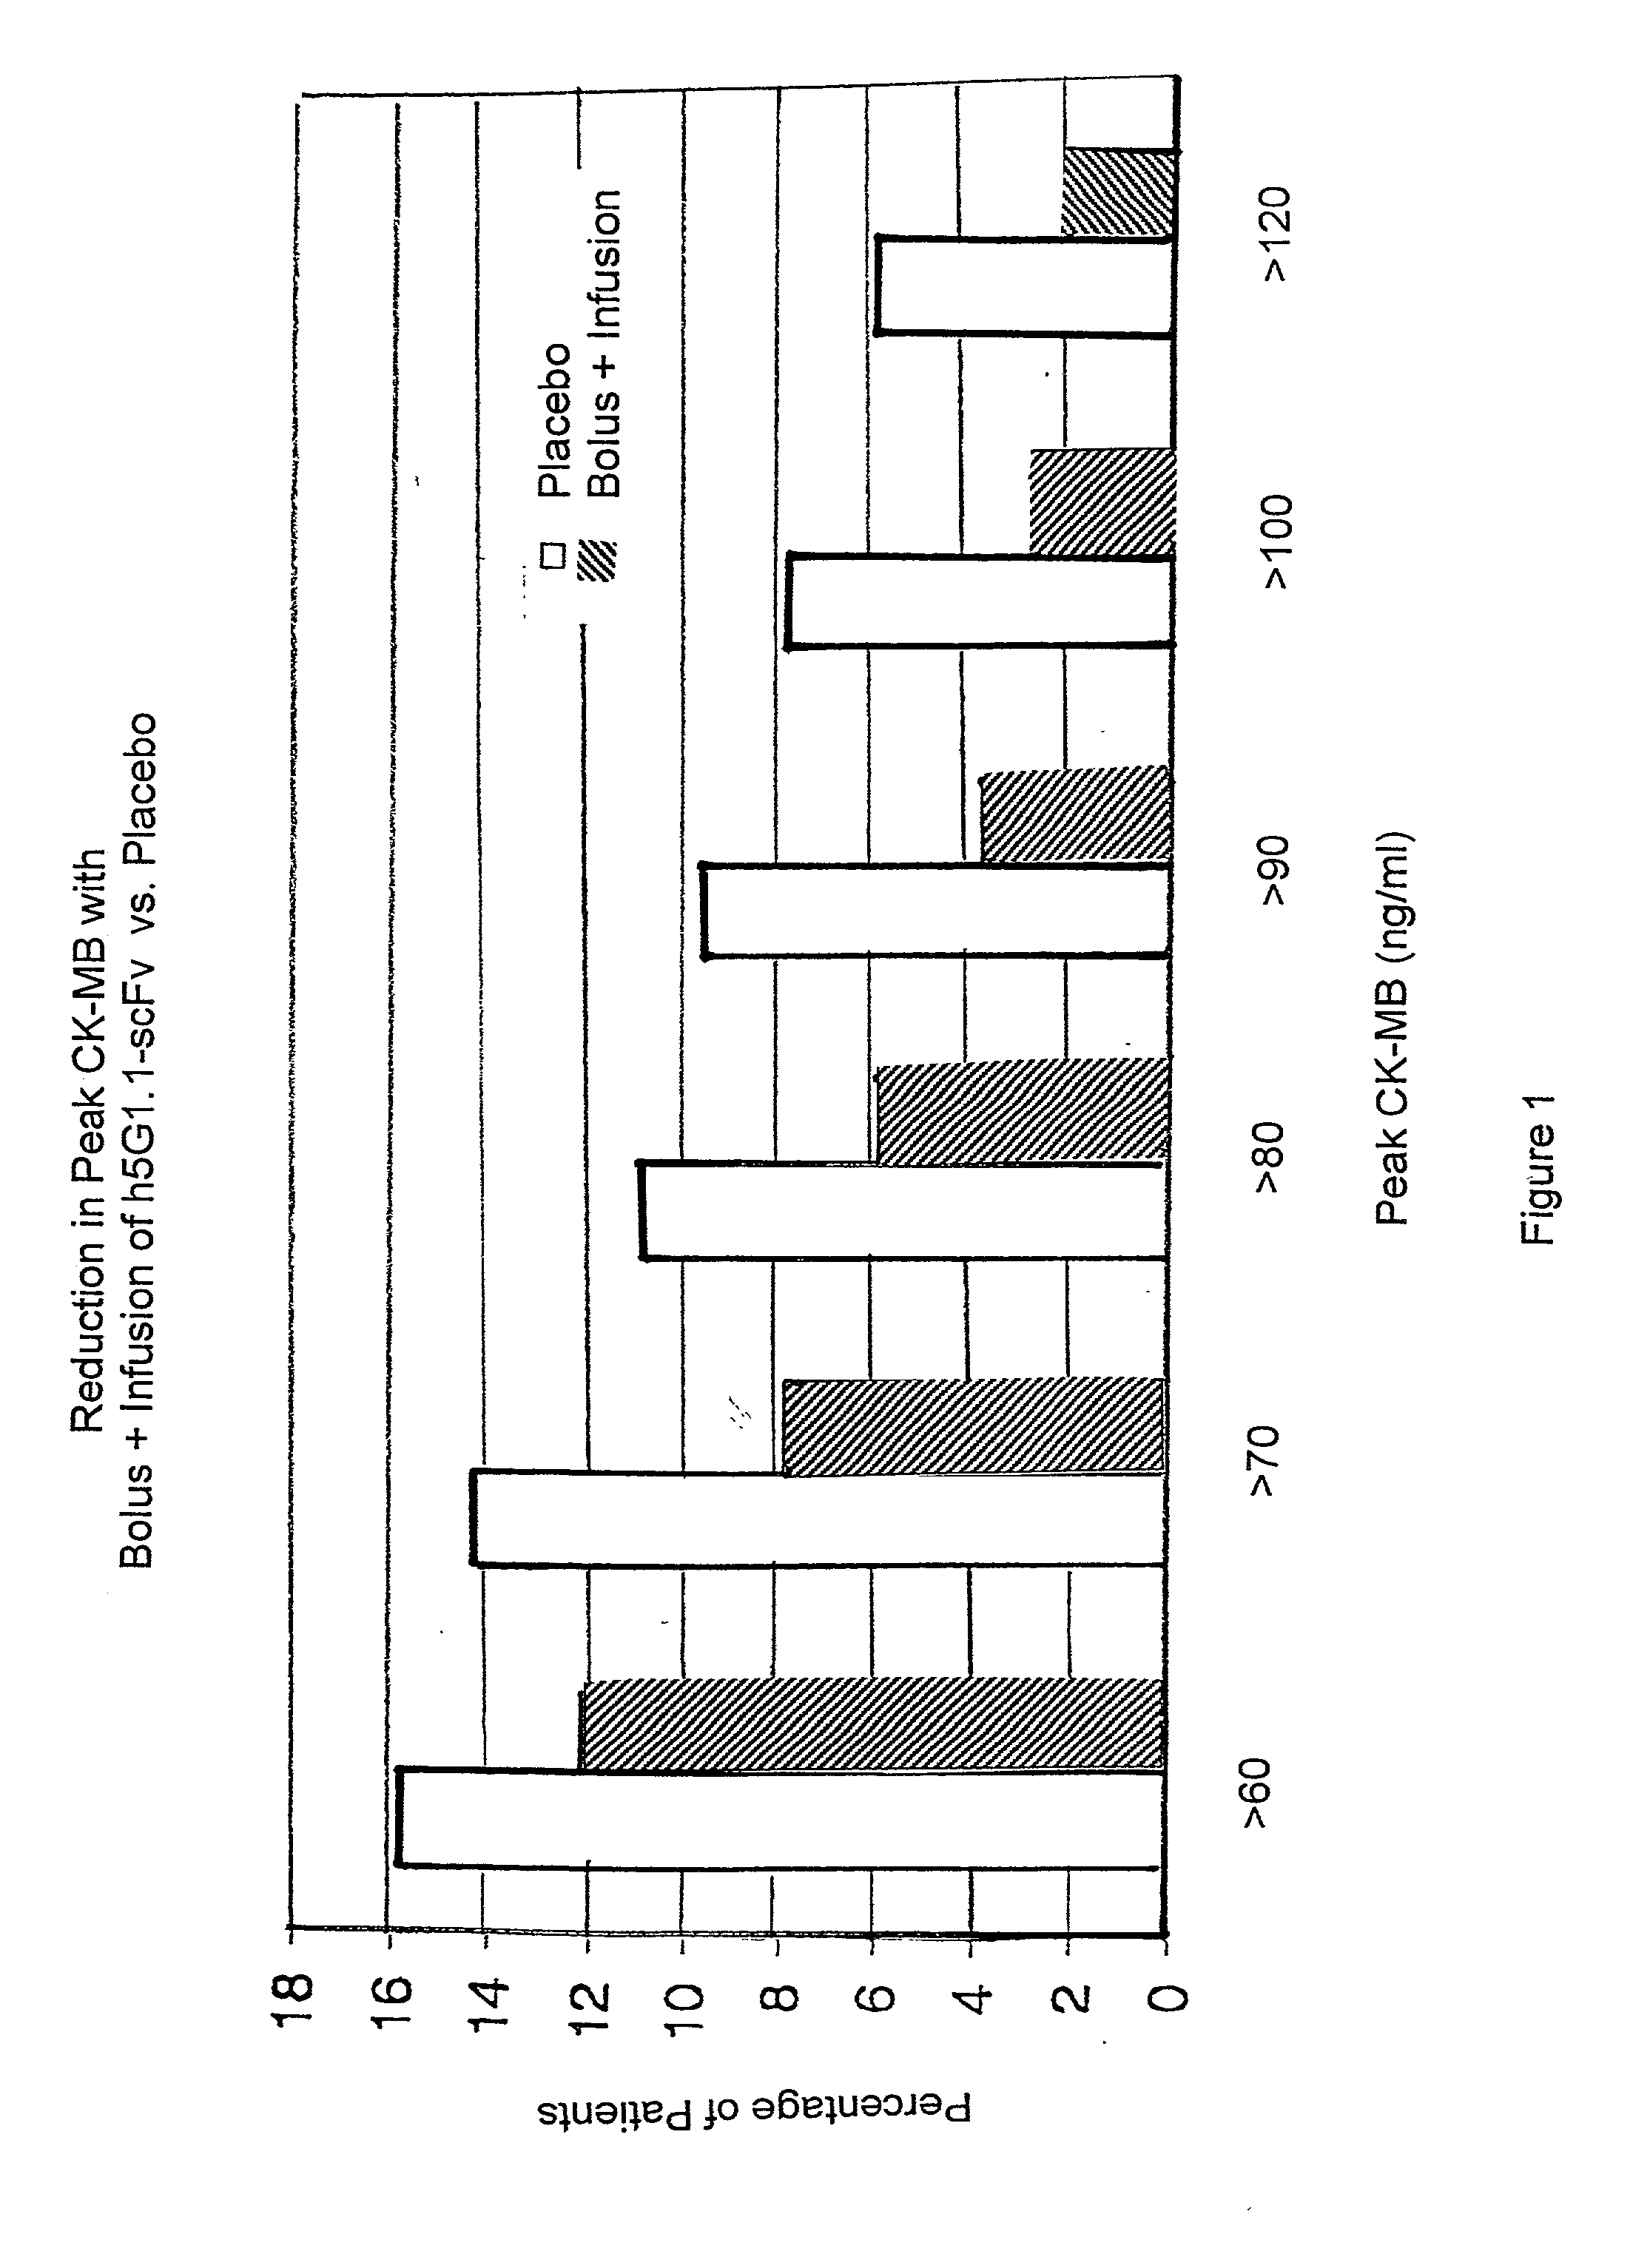 Method of prophylaxis against large myocardial infractions